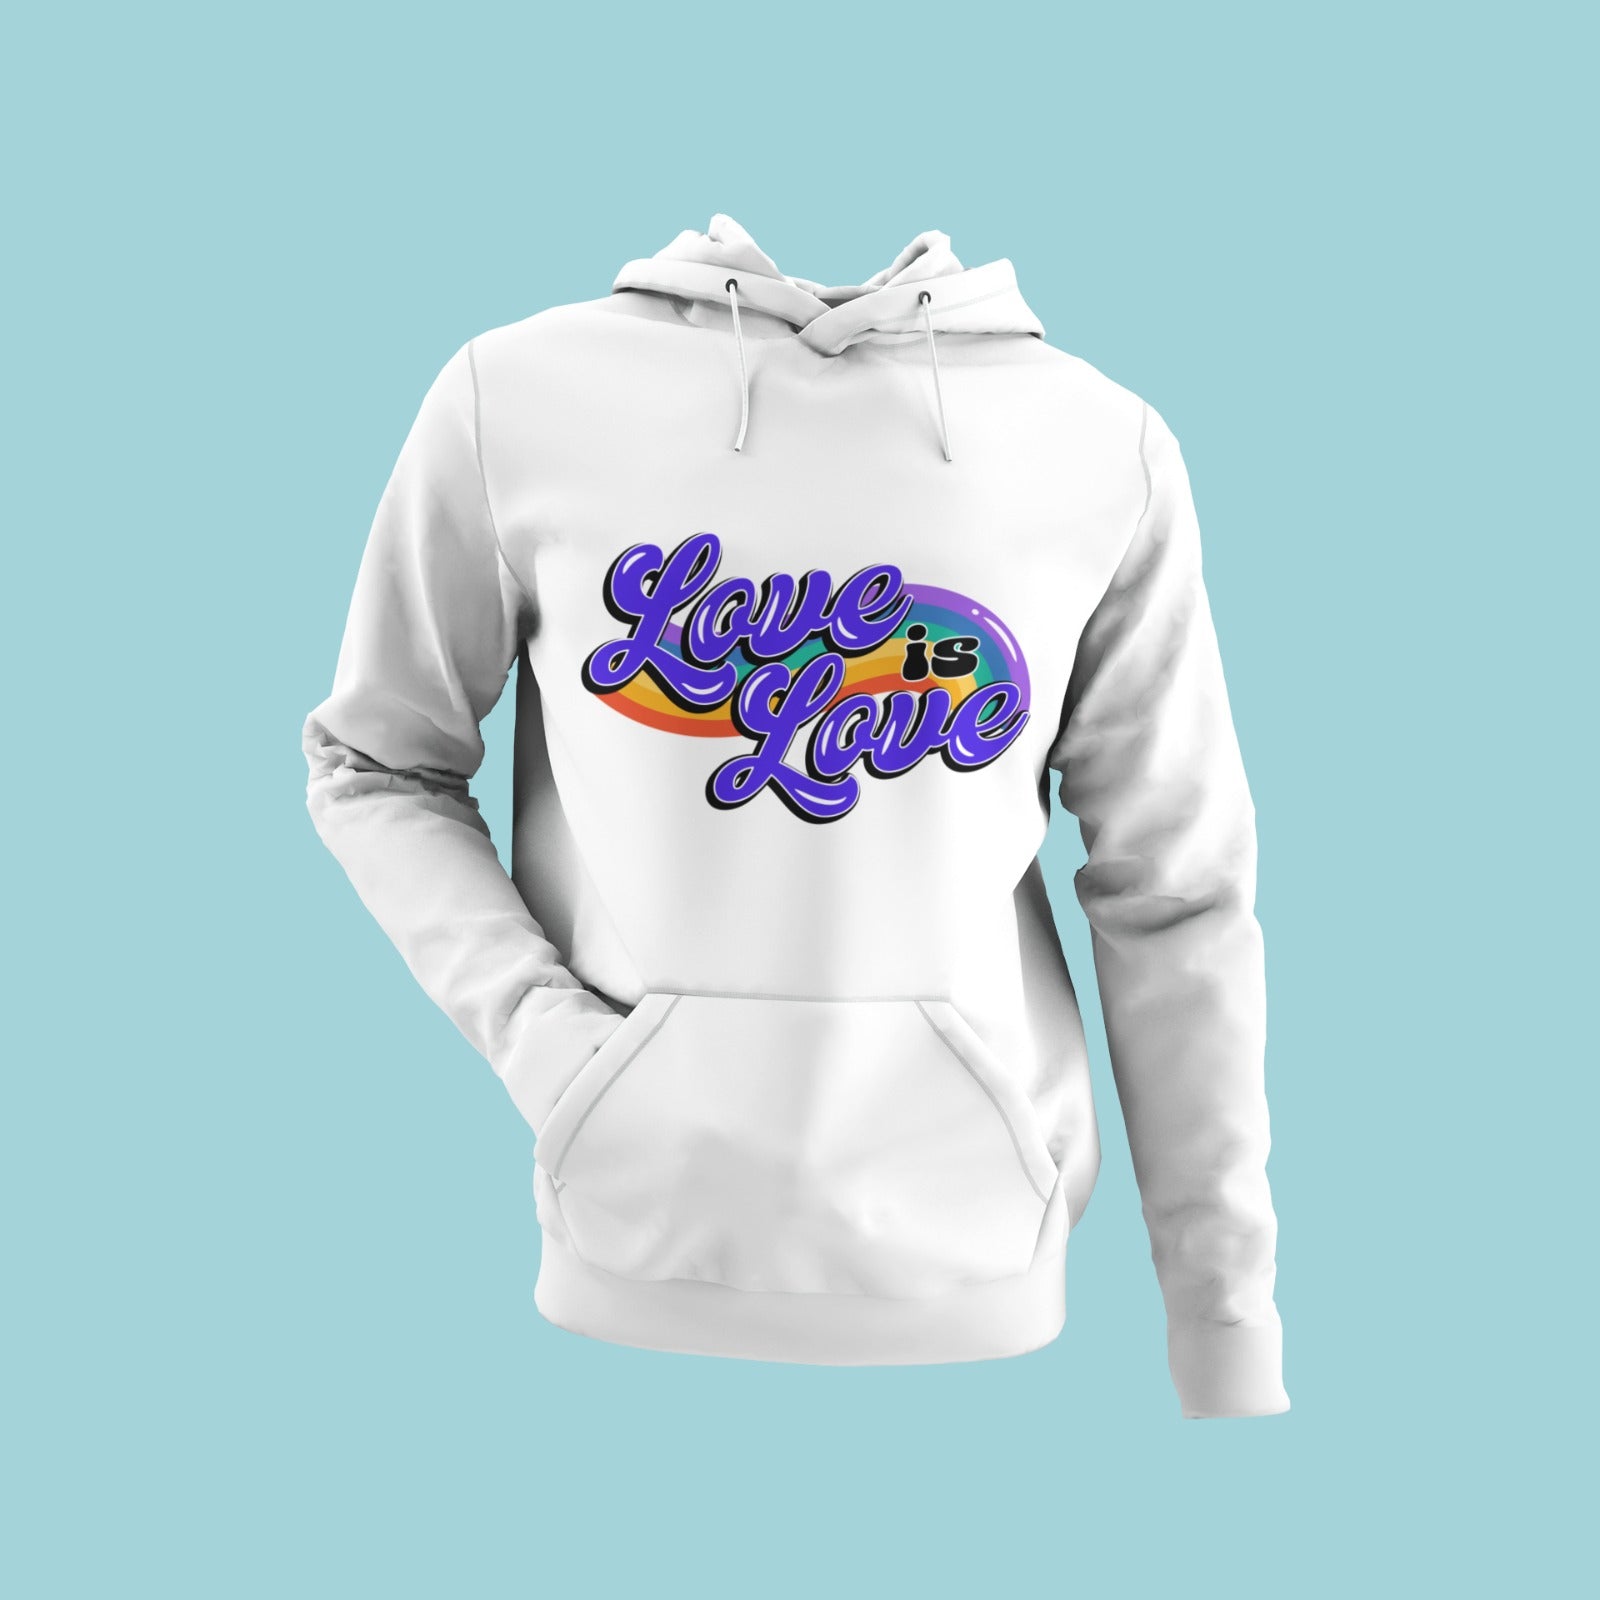 Celebrate love with this white hoodie featuring a colorful rainbow background and the message "Love is Love." Spread a message of equality and acceptance while staying cozy in this comfortable and stylish hoodie. Perfect for Pride events or everyday wear. Available in multiple sizes for everyone to show their support.